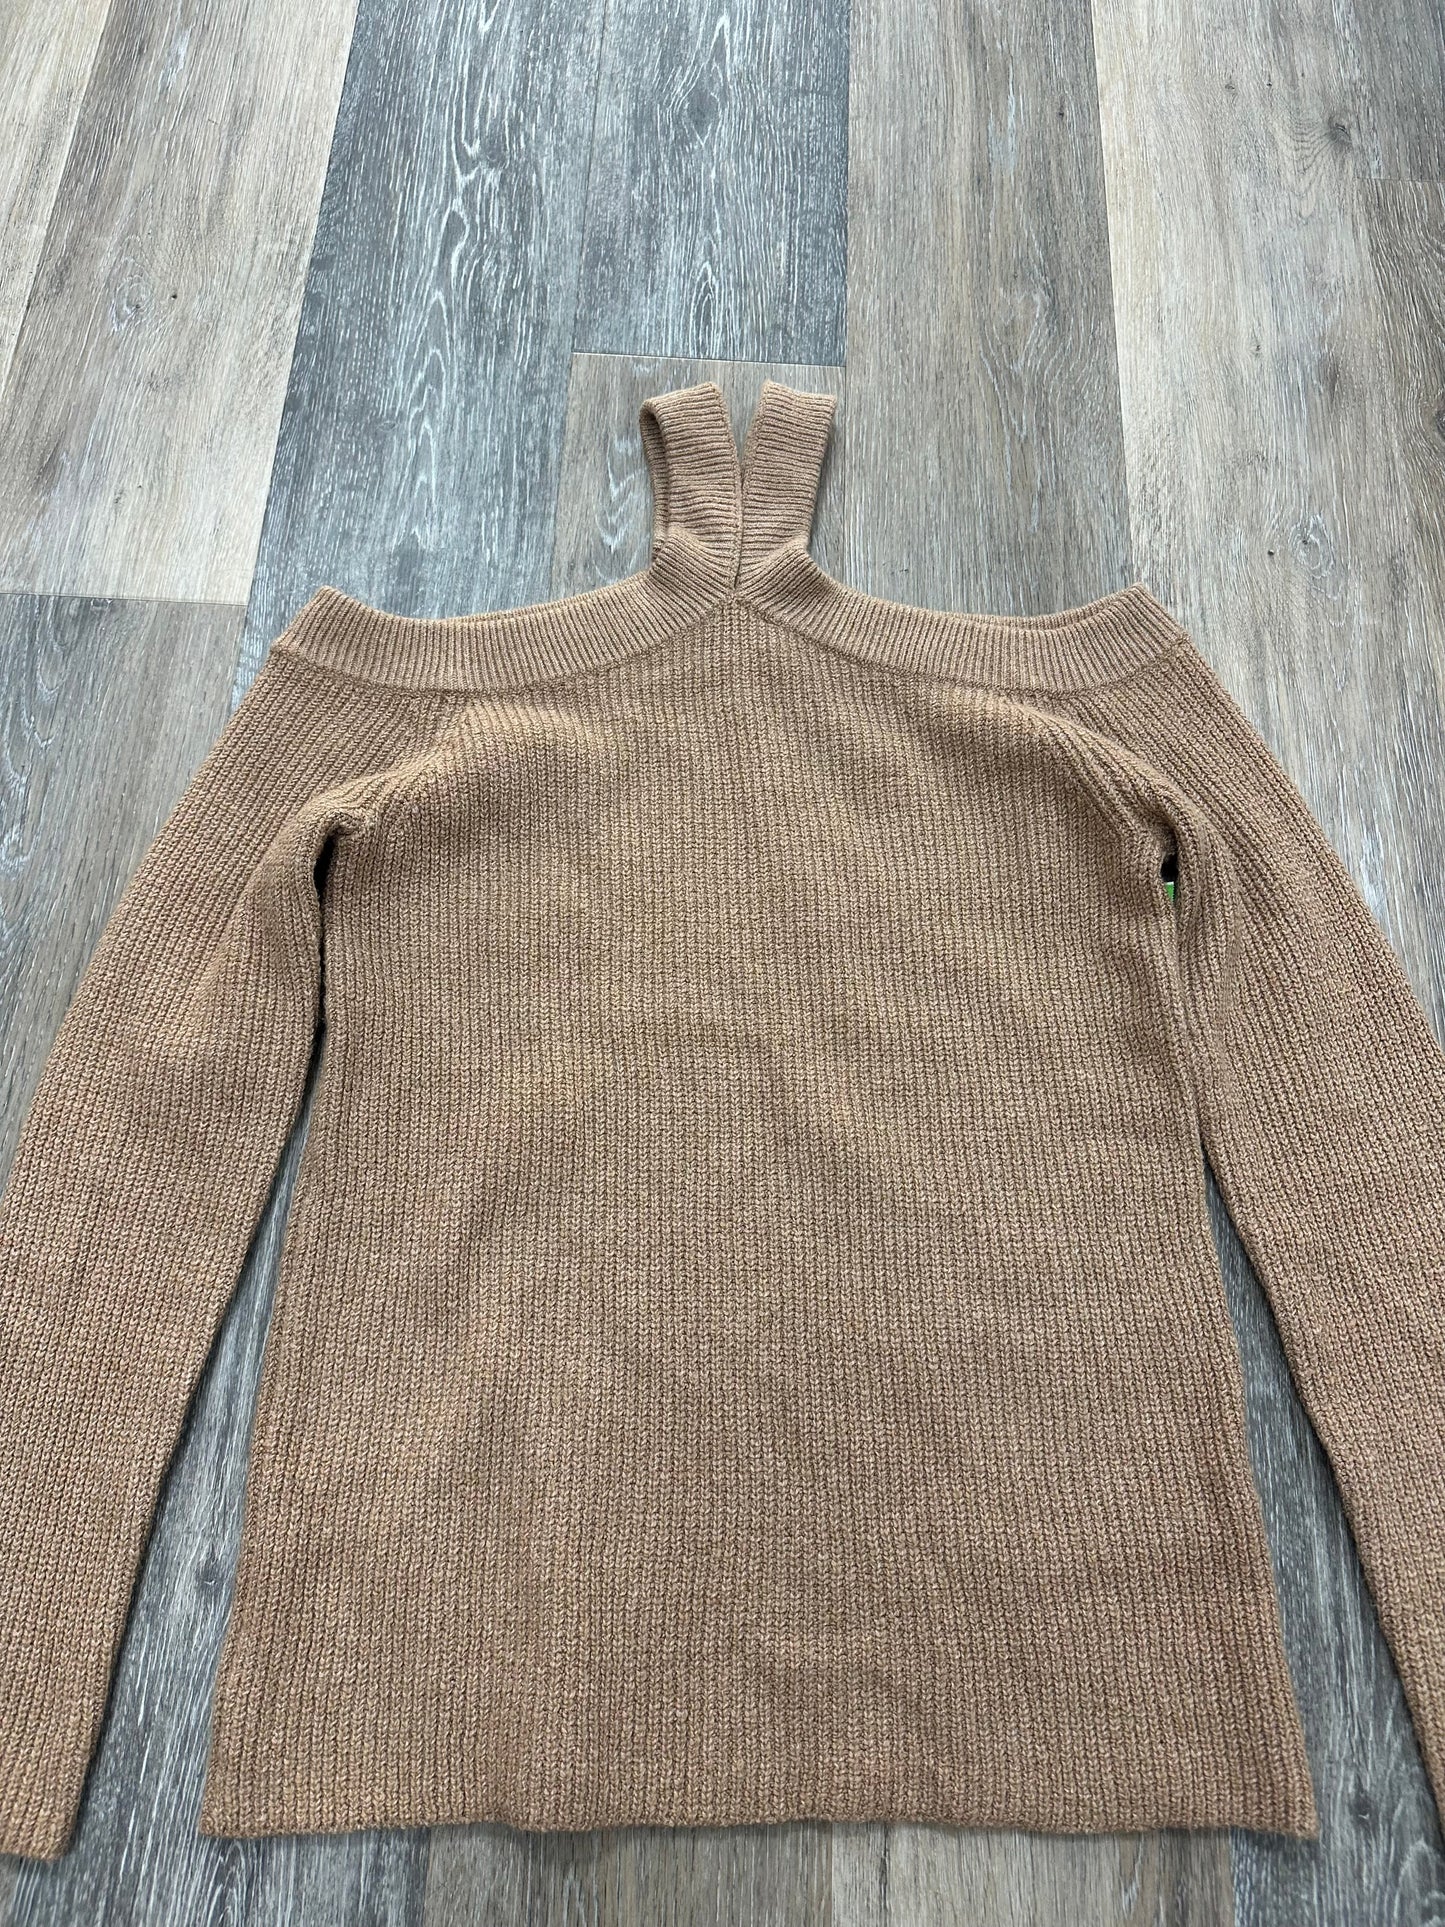 Sweater By 1.state  Size: S